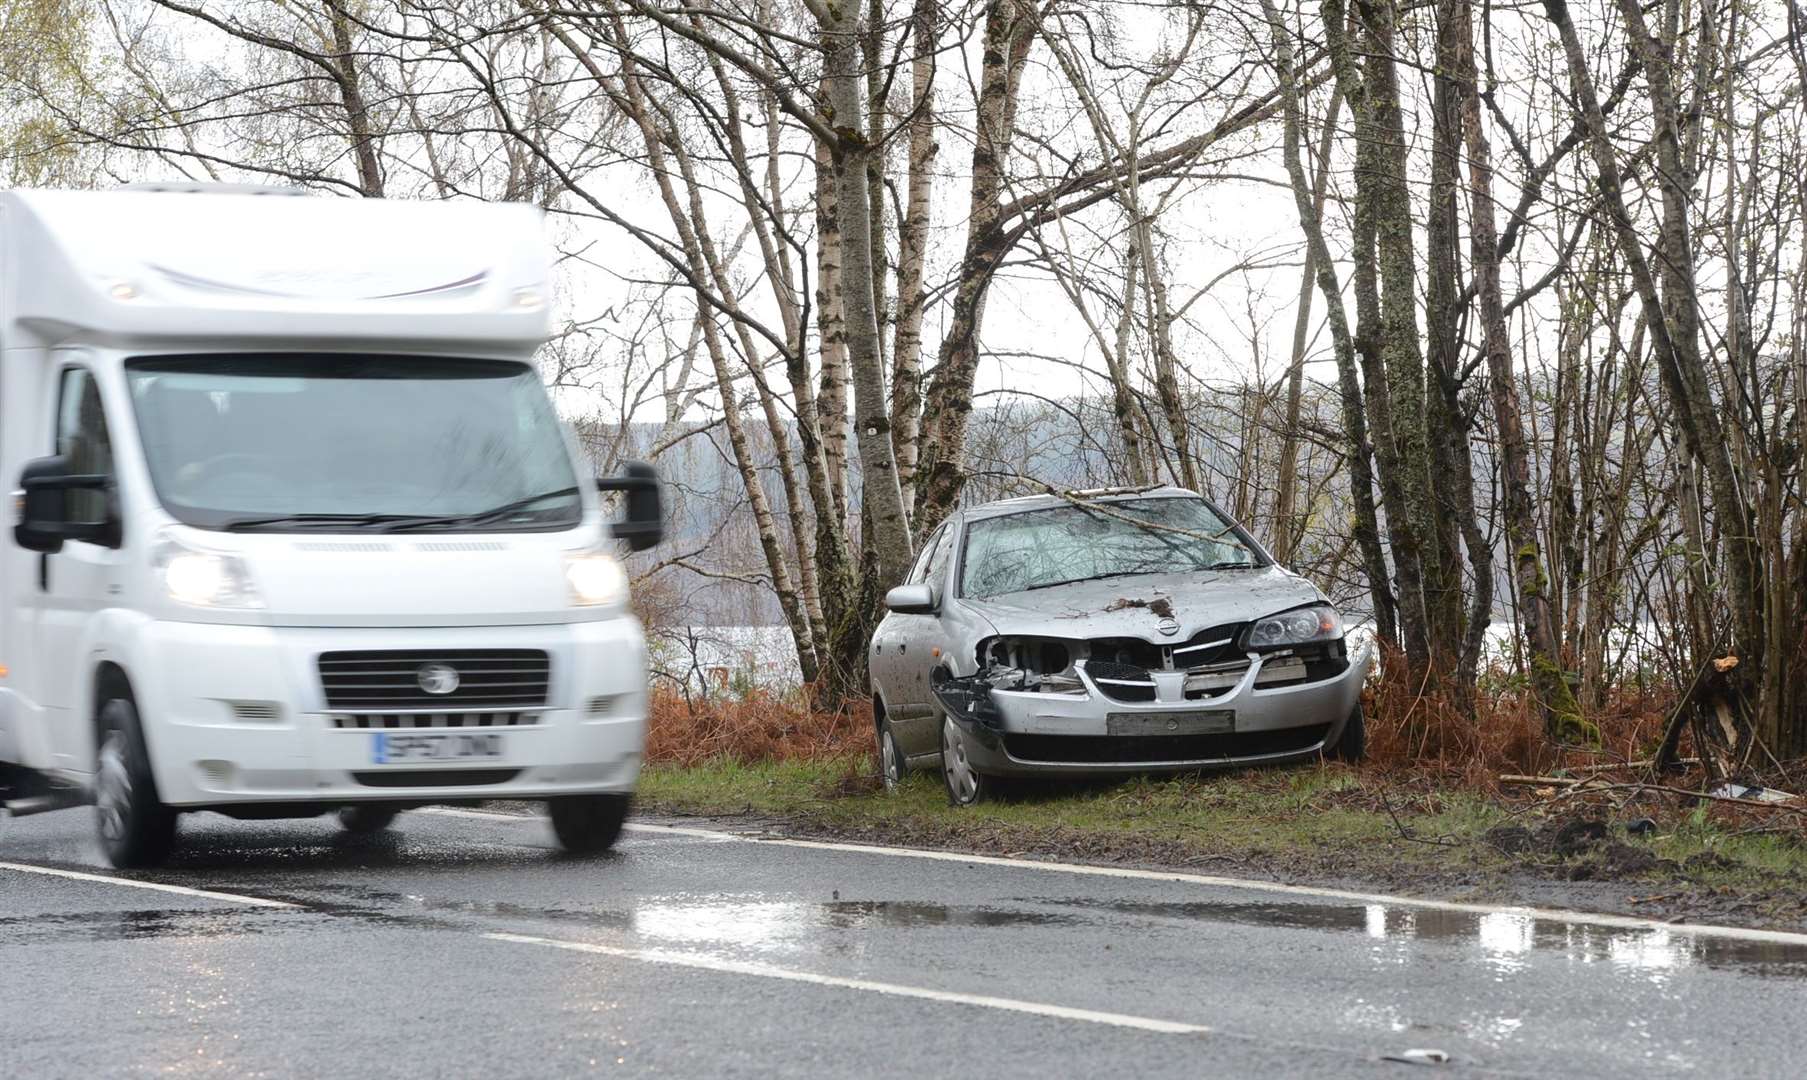 Aftermath of an accident on the A82.